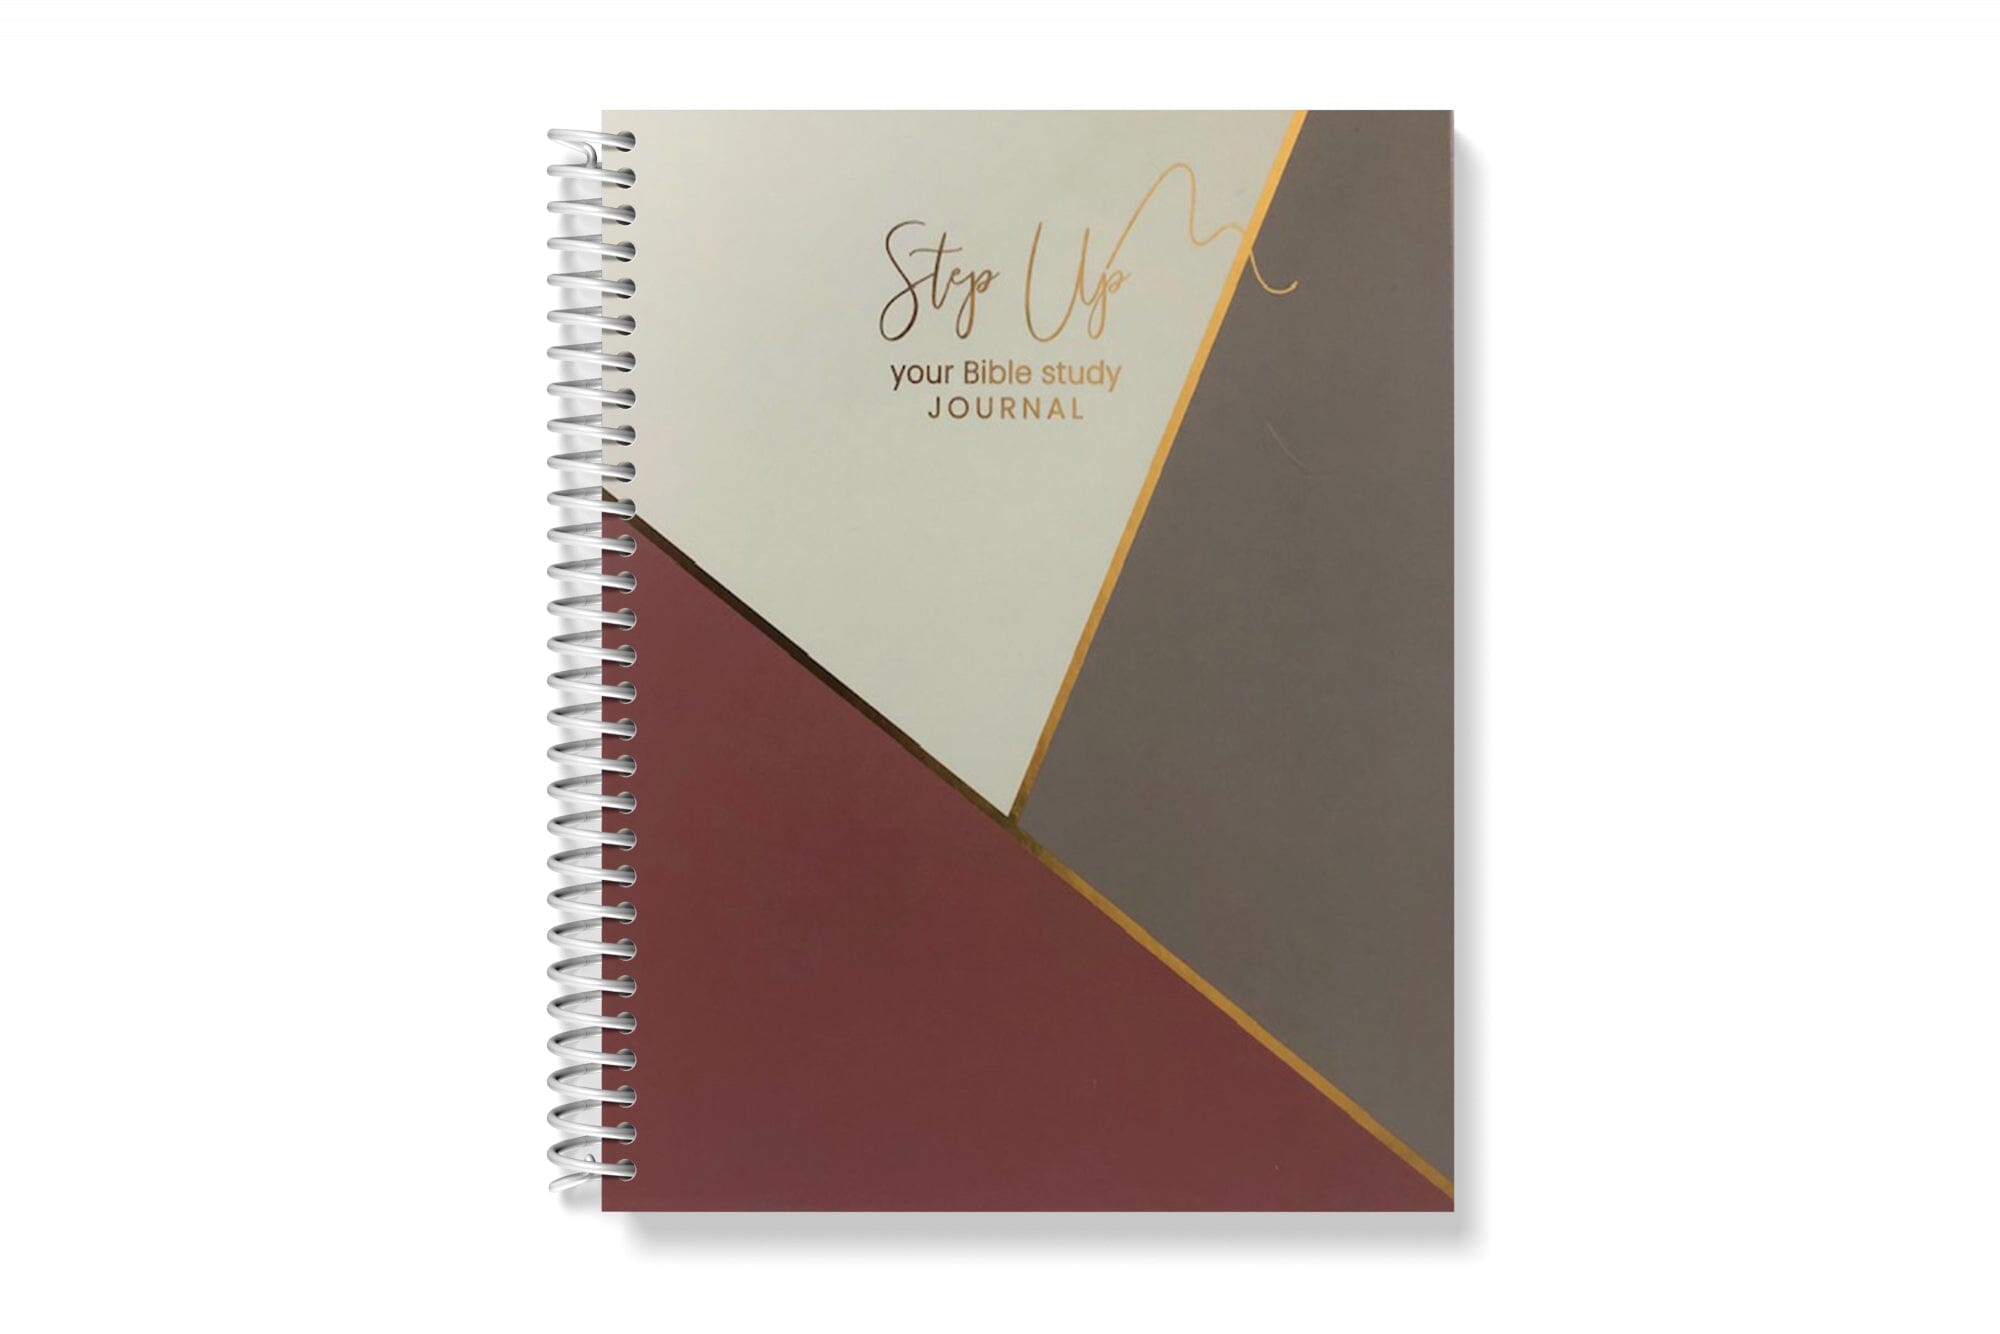 Step Up Your Bible Study Journal